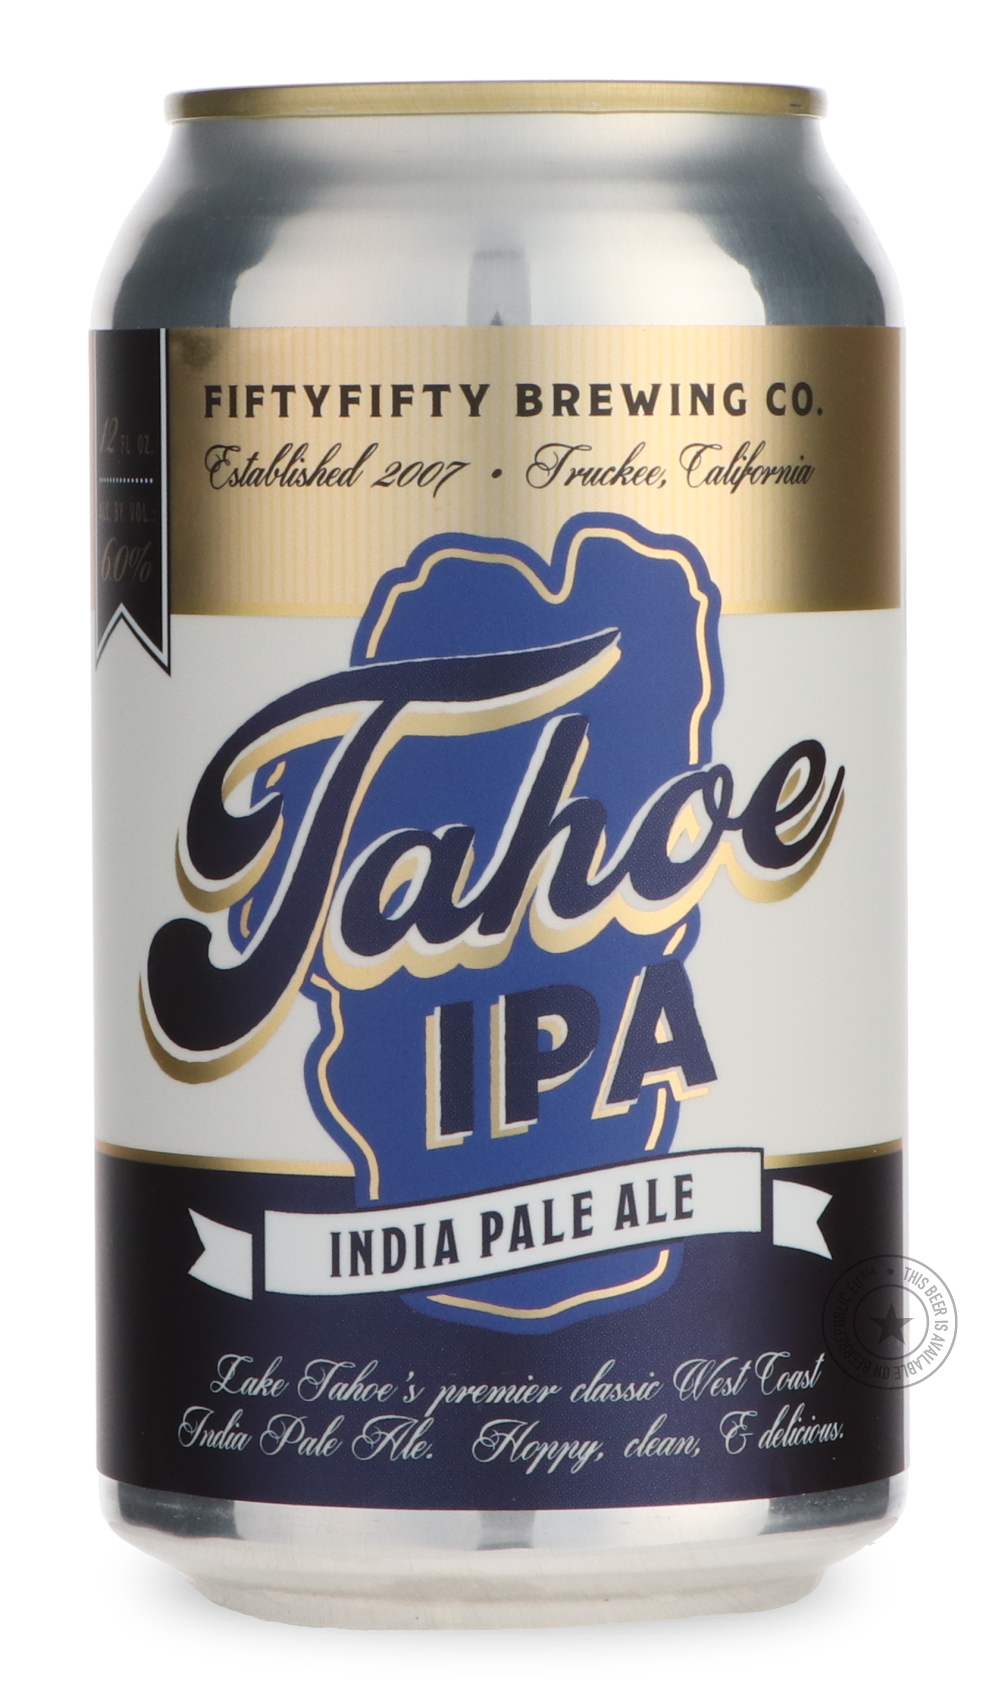 -FiftyFifty- Tahoe IPA-IPA- Only @ Beer Republic - The best online beer store for American & Canadian craft beer - Buy beer online from the USA and Canada - Bier online kopen - Amerikaans bier kopen - Craft beer store - Craft beer kopen - Amerikanisch bier kaufen - Bier online kaufen - Acheter biere online - IPA - Stout - Porter - New England IPA - Hazy IPA - Imperial Stout - Barrel Aged - Barrel Aged Imperial Stout - Brown - Dark beer - Blond - Blonde - Pilsner - Lager - Wheat - Weizen - Amber - Barley Win